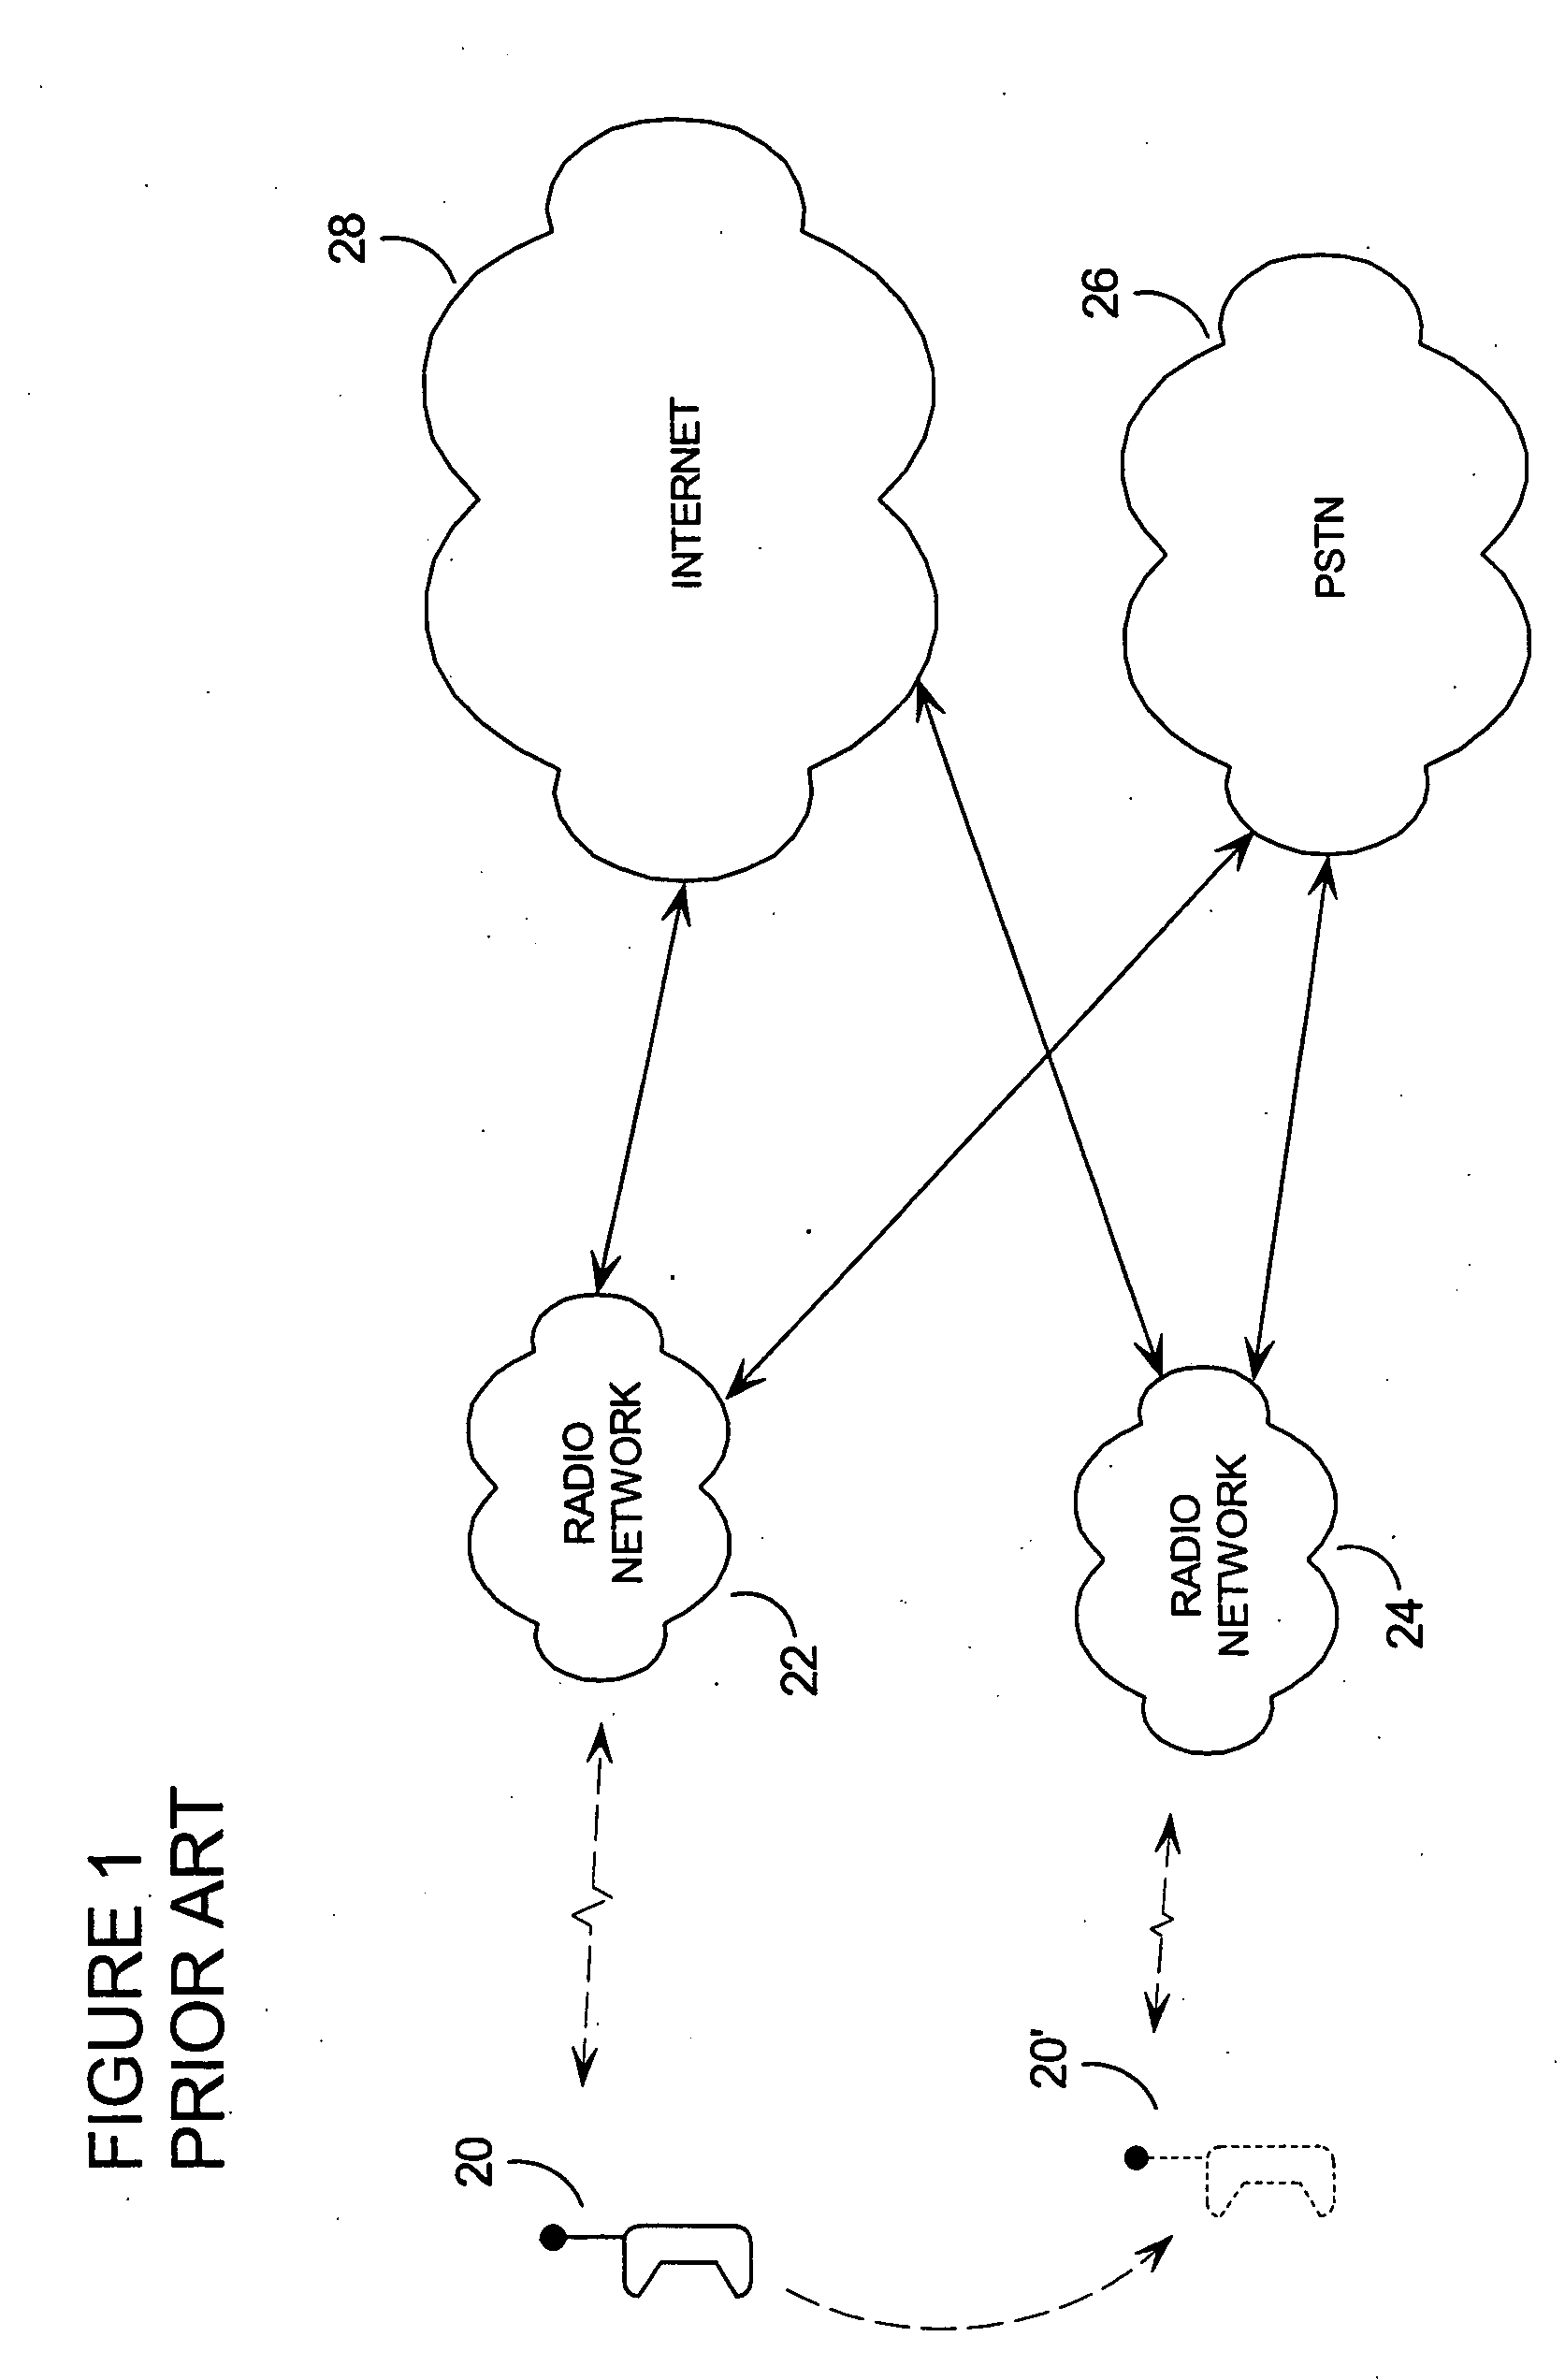 Method and system for session accounting in wireless networks